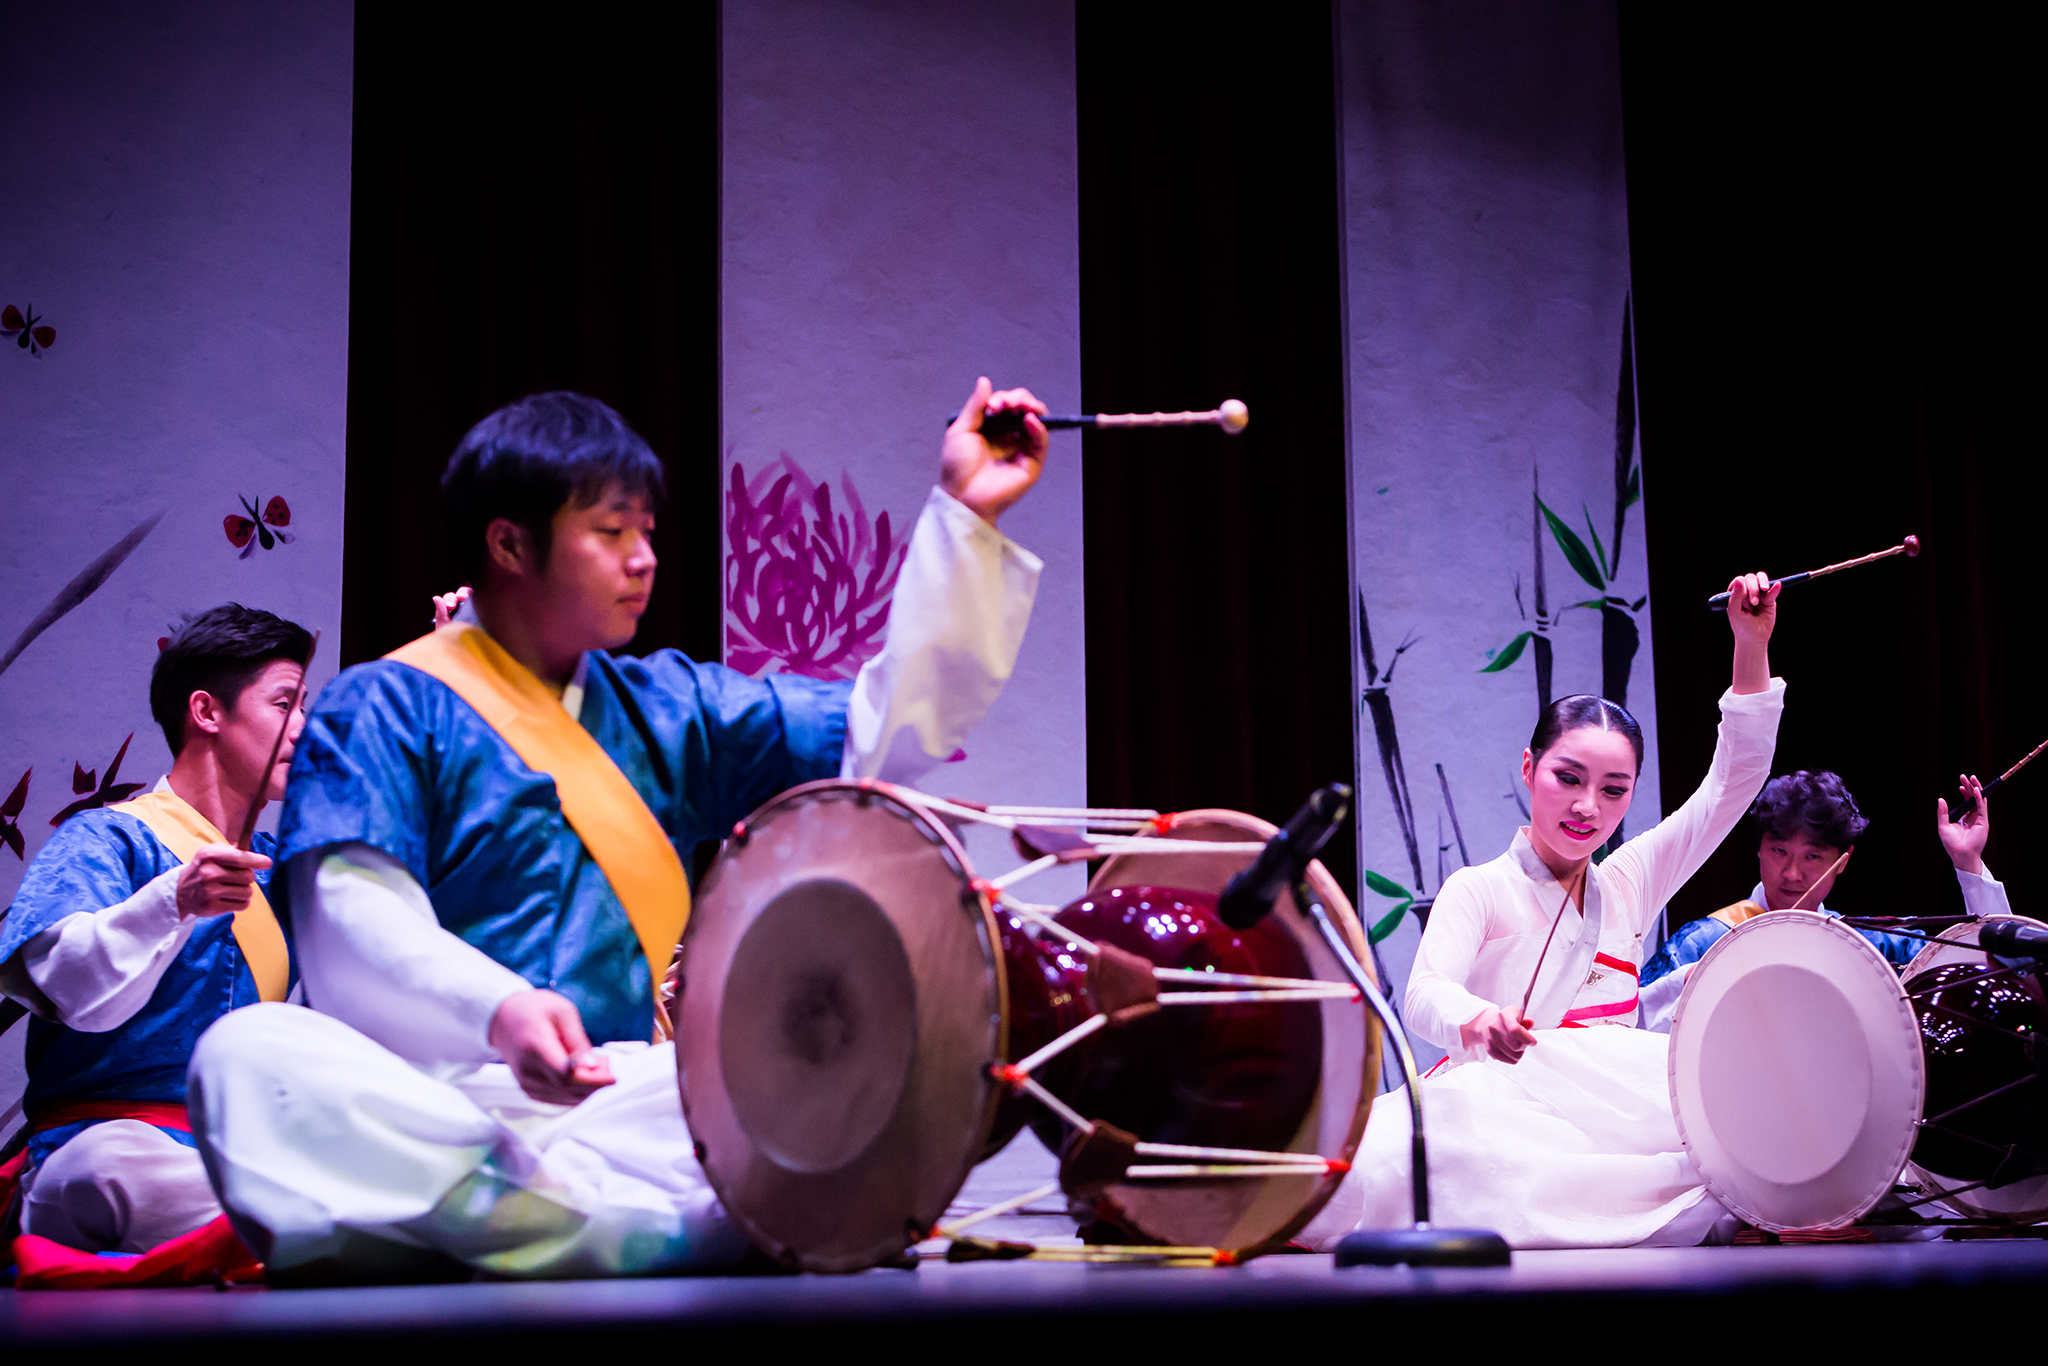 A group of performers sitting on a stage playing various percussion instruments